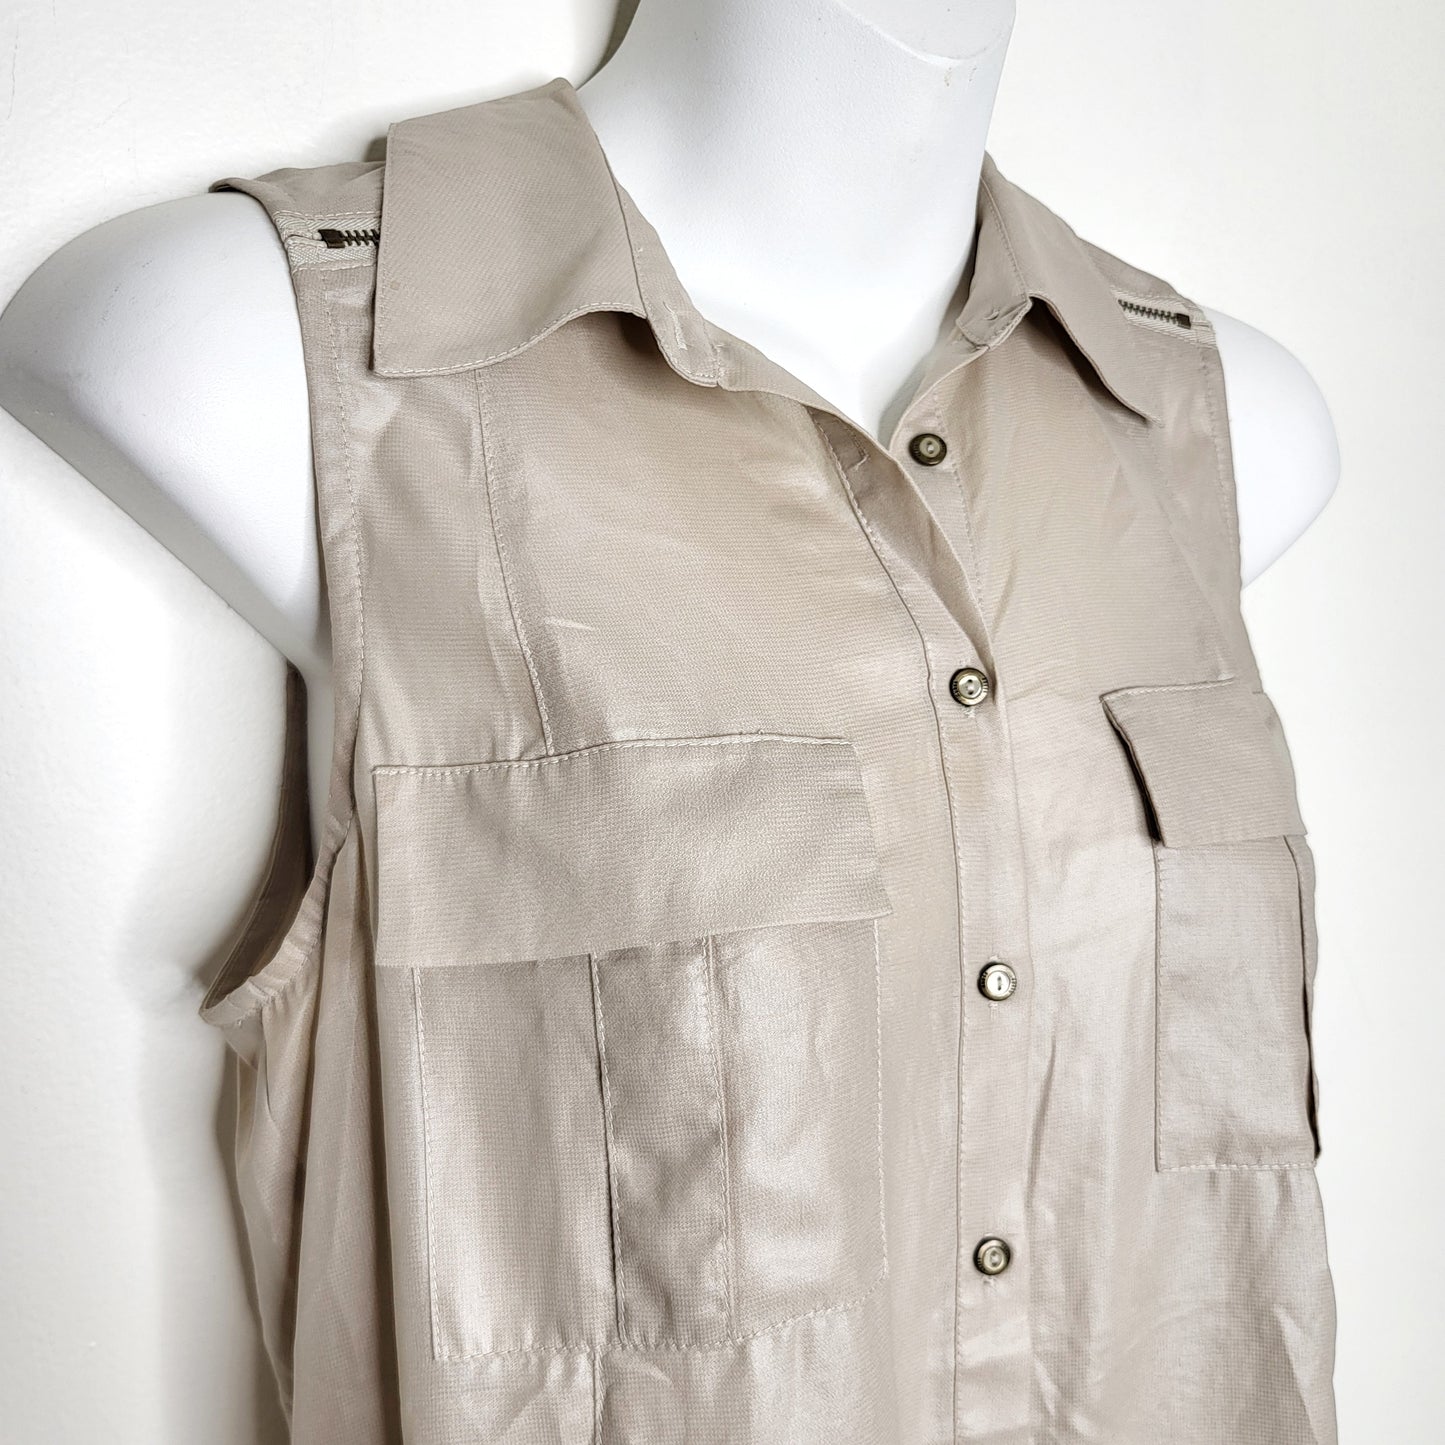 DZAV1 - Guess taupe coloured sleeveless button down blouse, size XS, good condition